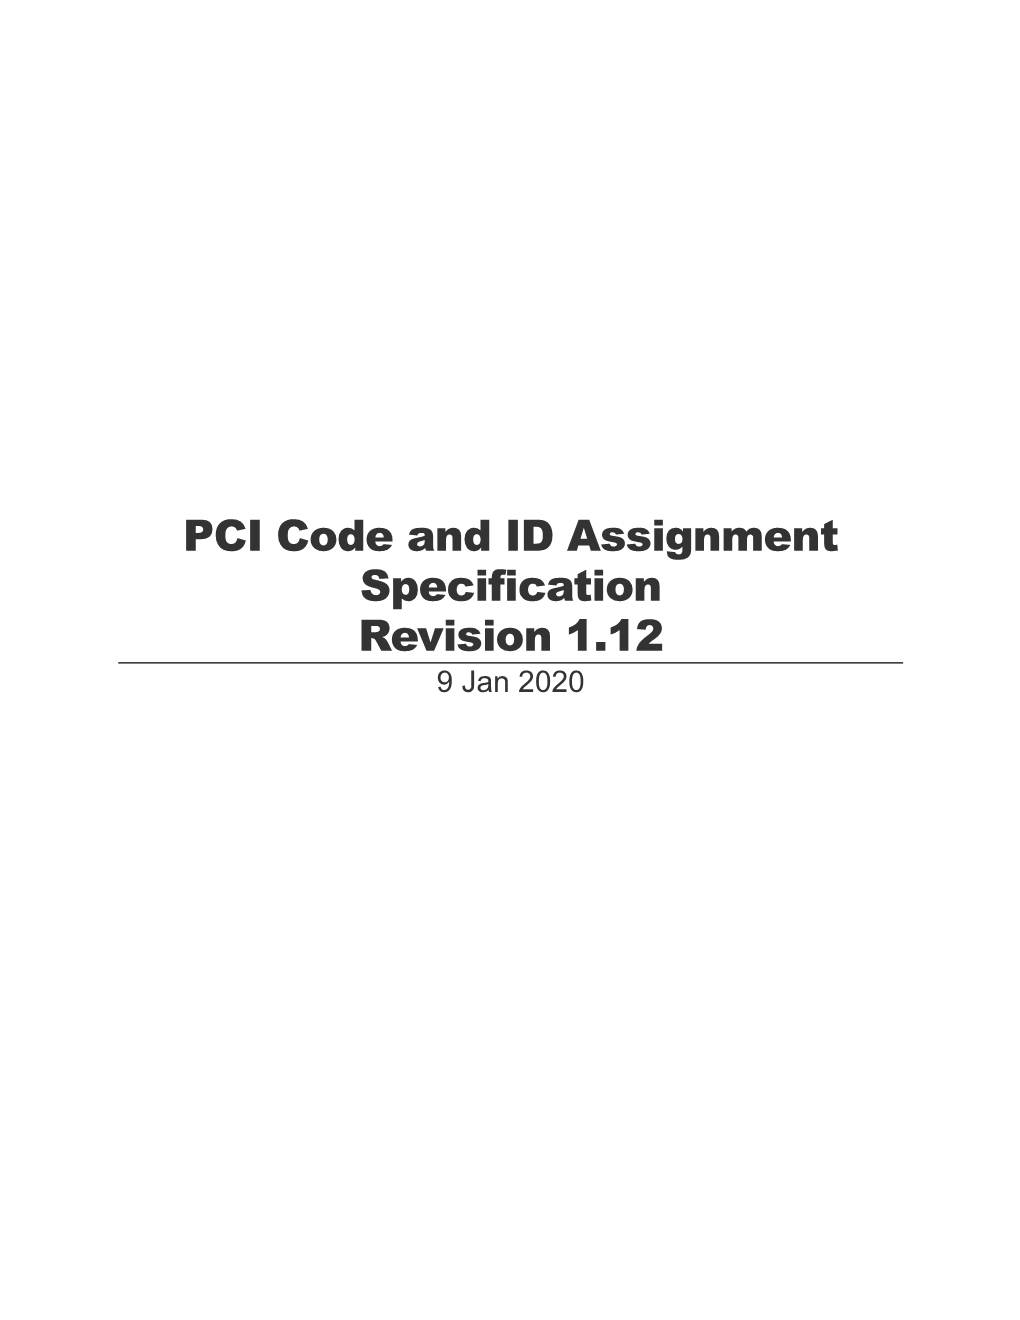 PCI Code and ID Assignment Specification Revision 1.12 9 Jan 2020